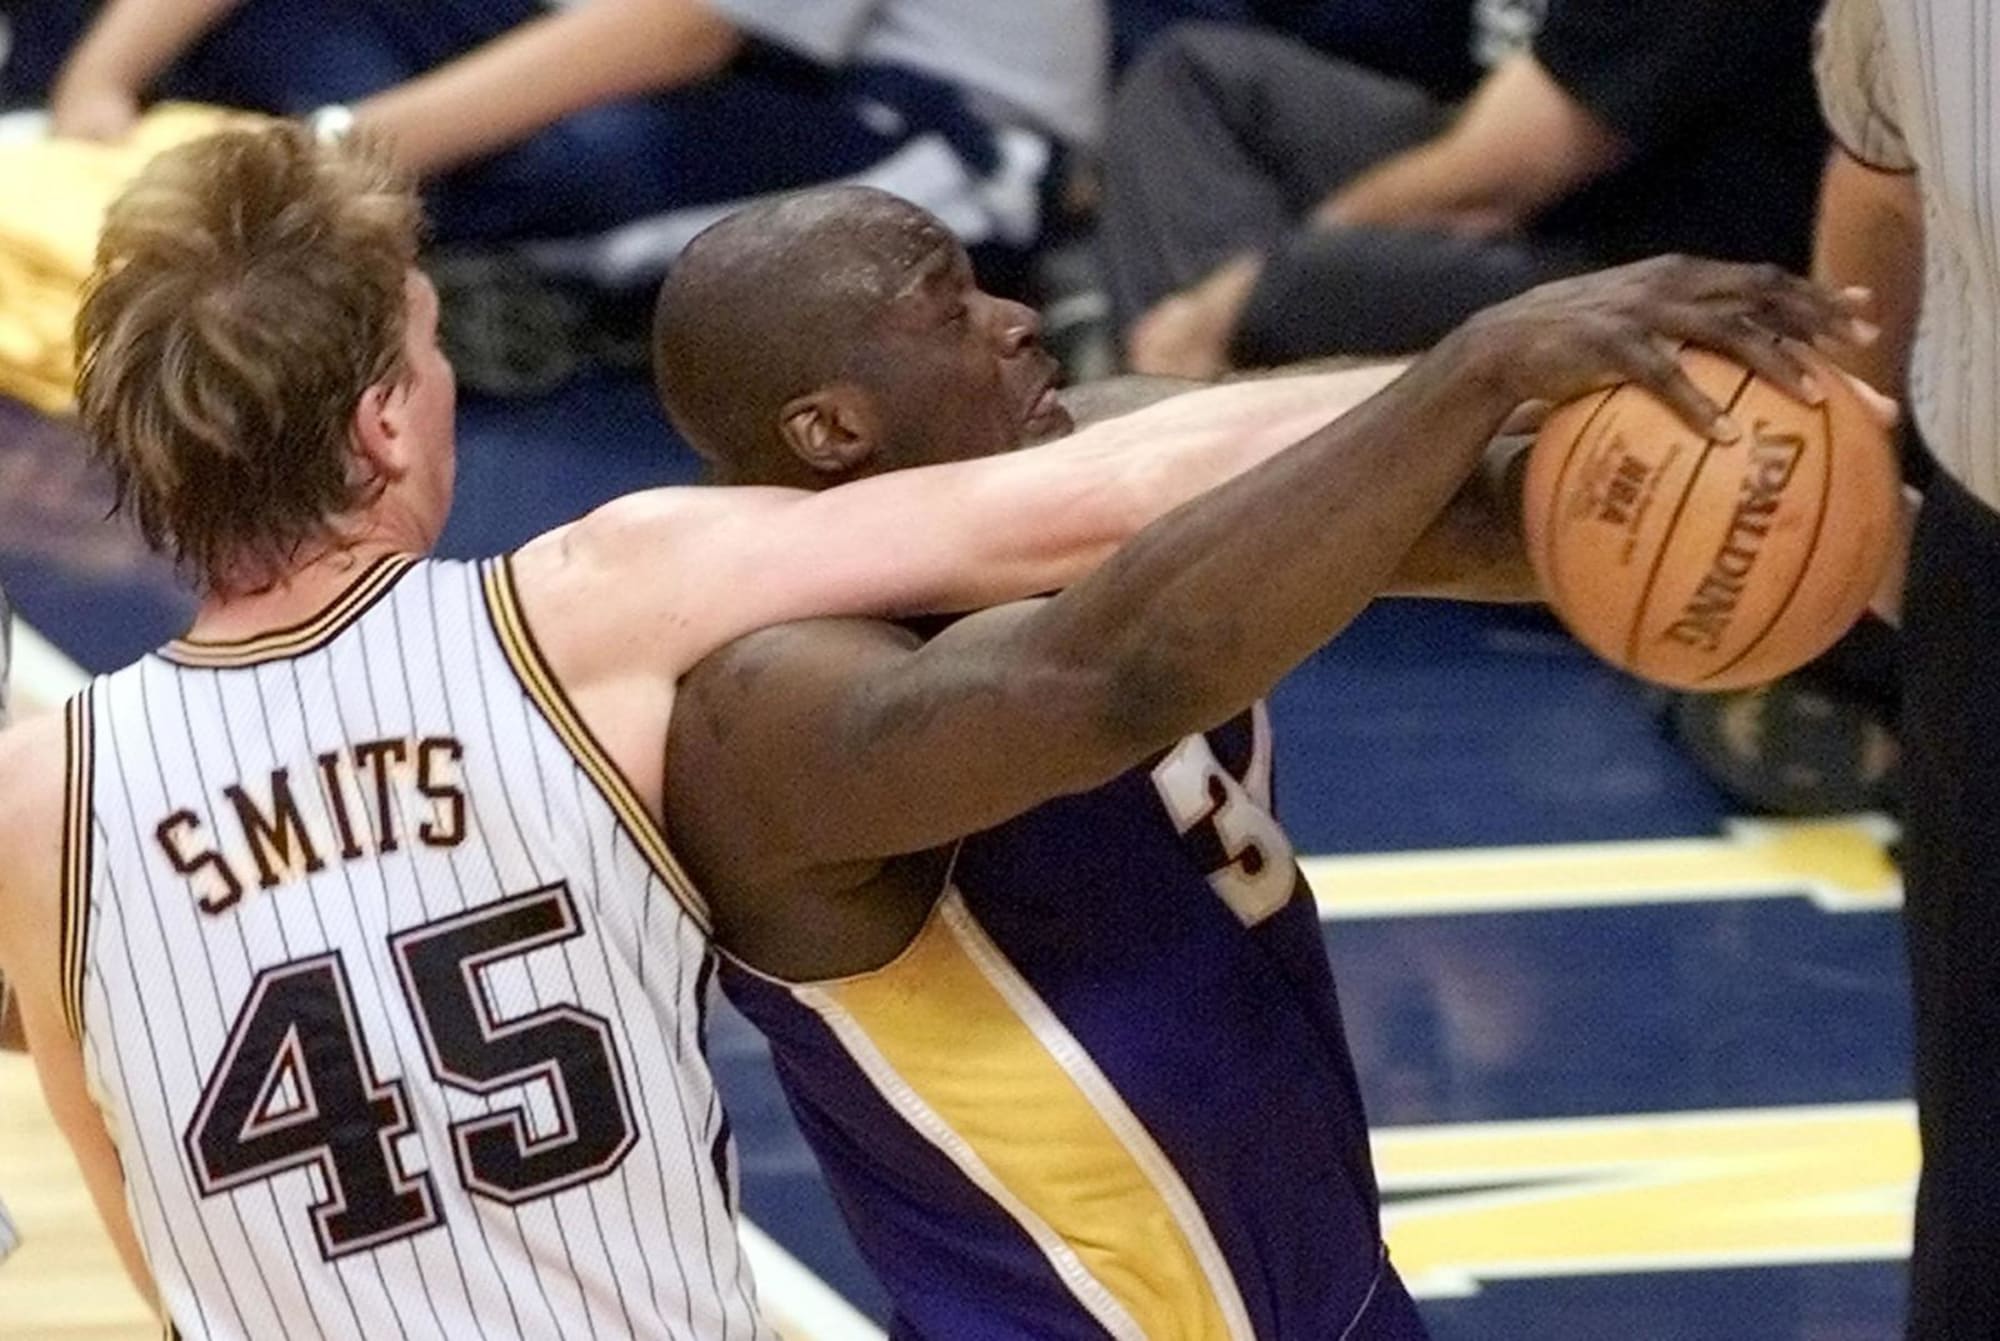 Shaquille O'Neal's Top Playoff Moments